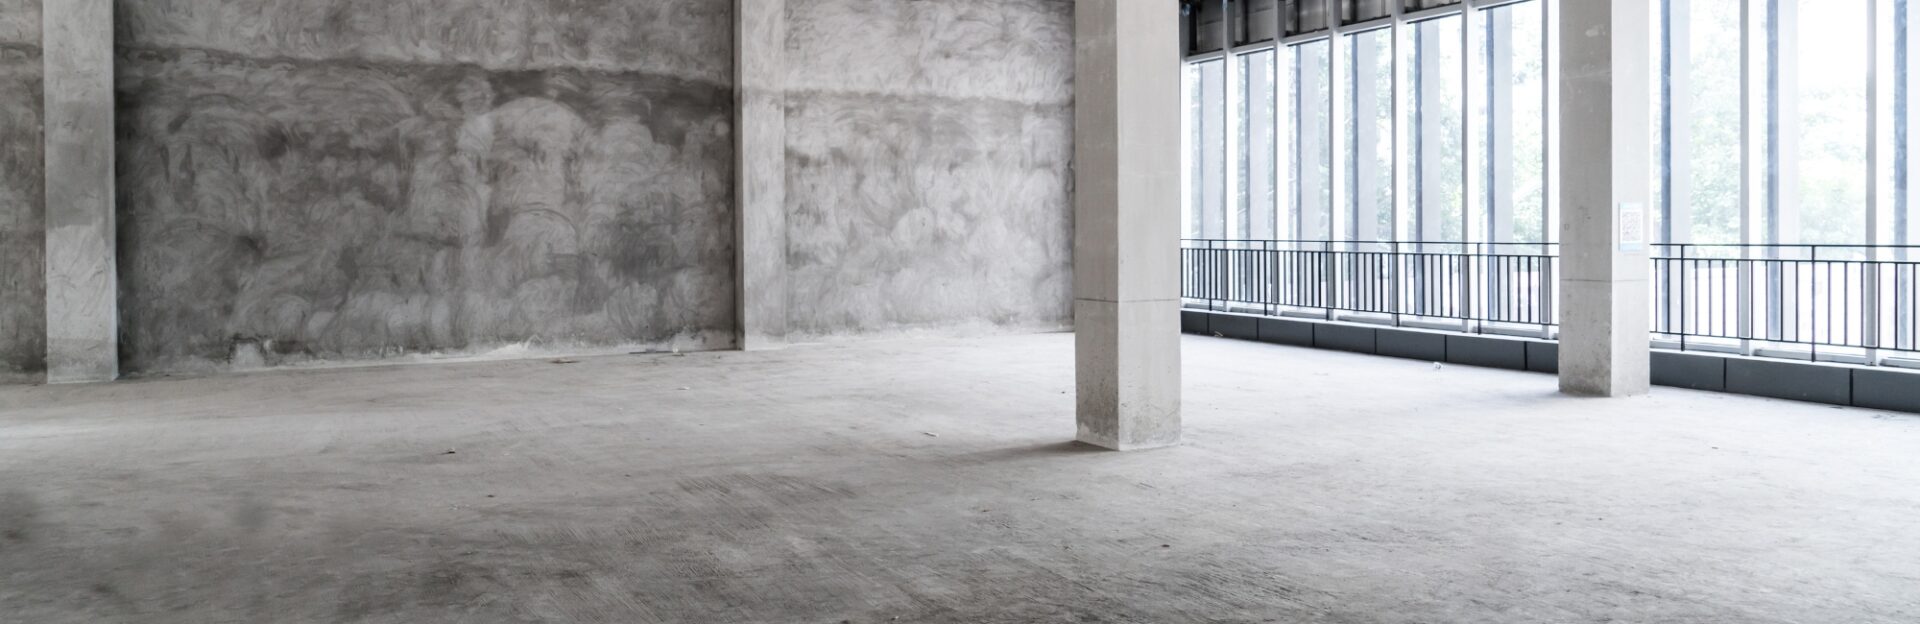 A room with concrete floors and walls.